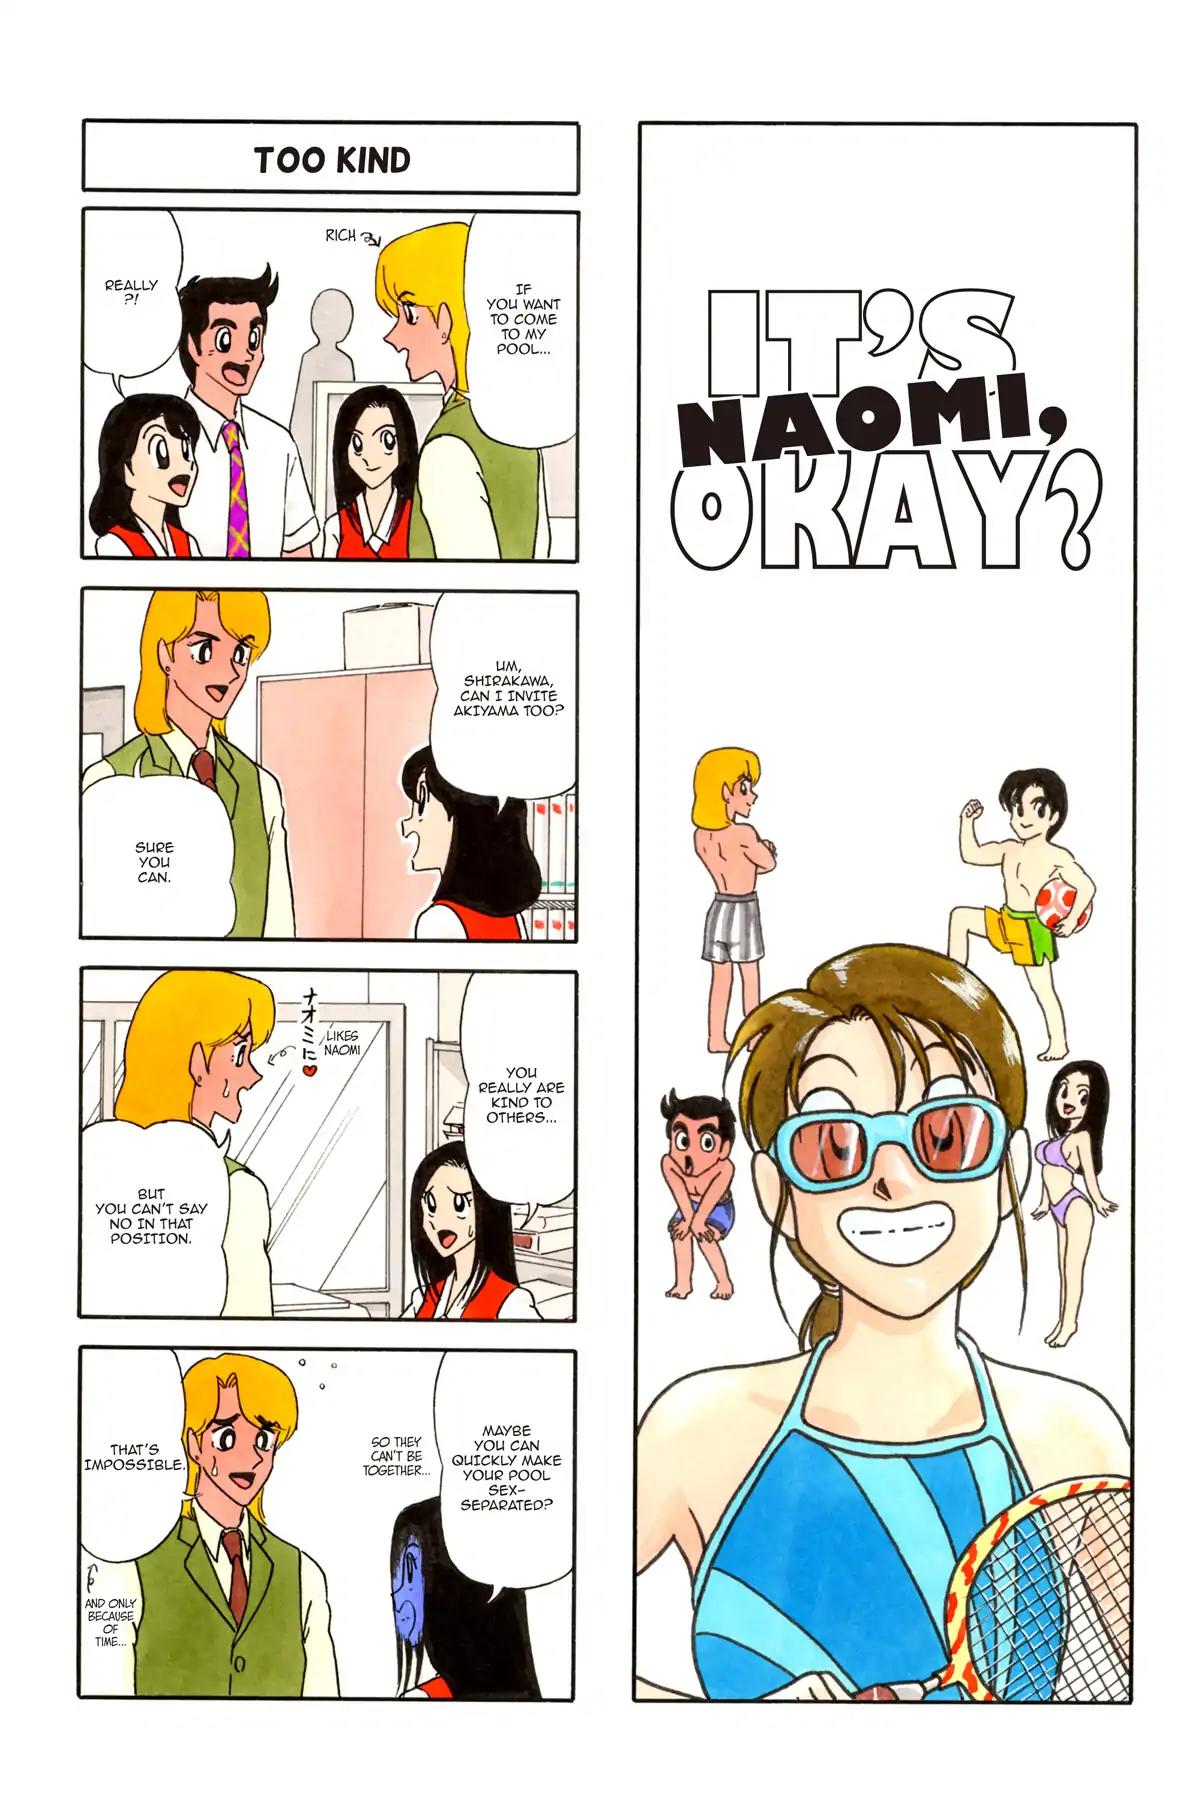 It's Naomi, Okay? After 16 Vol 1 Chapter 13